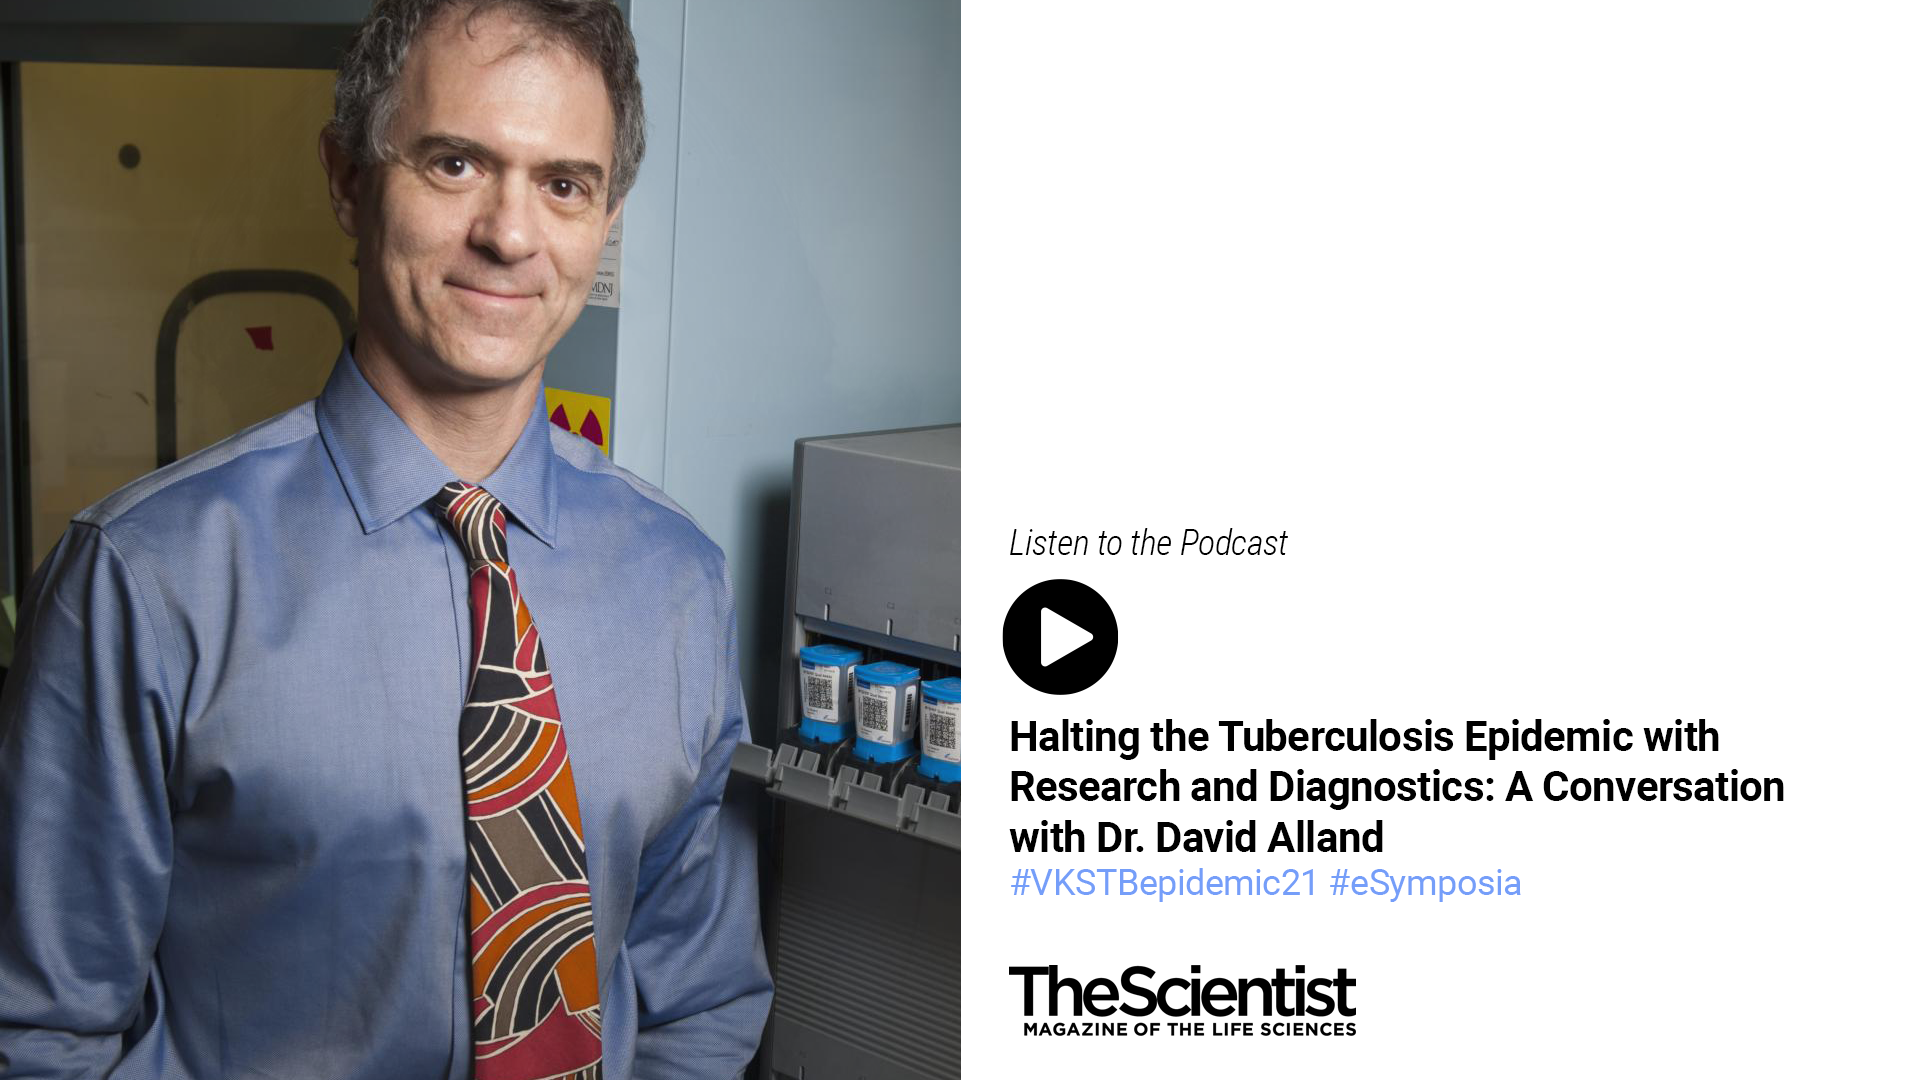 Halting the Tuberculosis Epidemic with Research and Diagnostics: A Conversation with Dr. David Alland